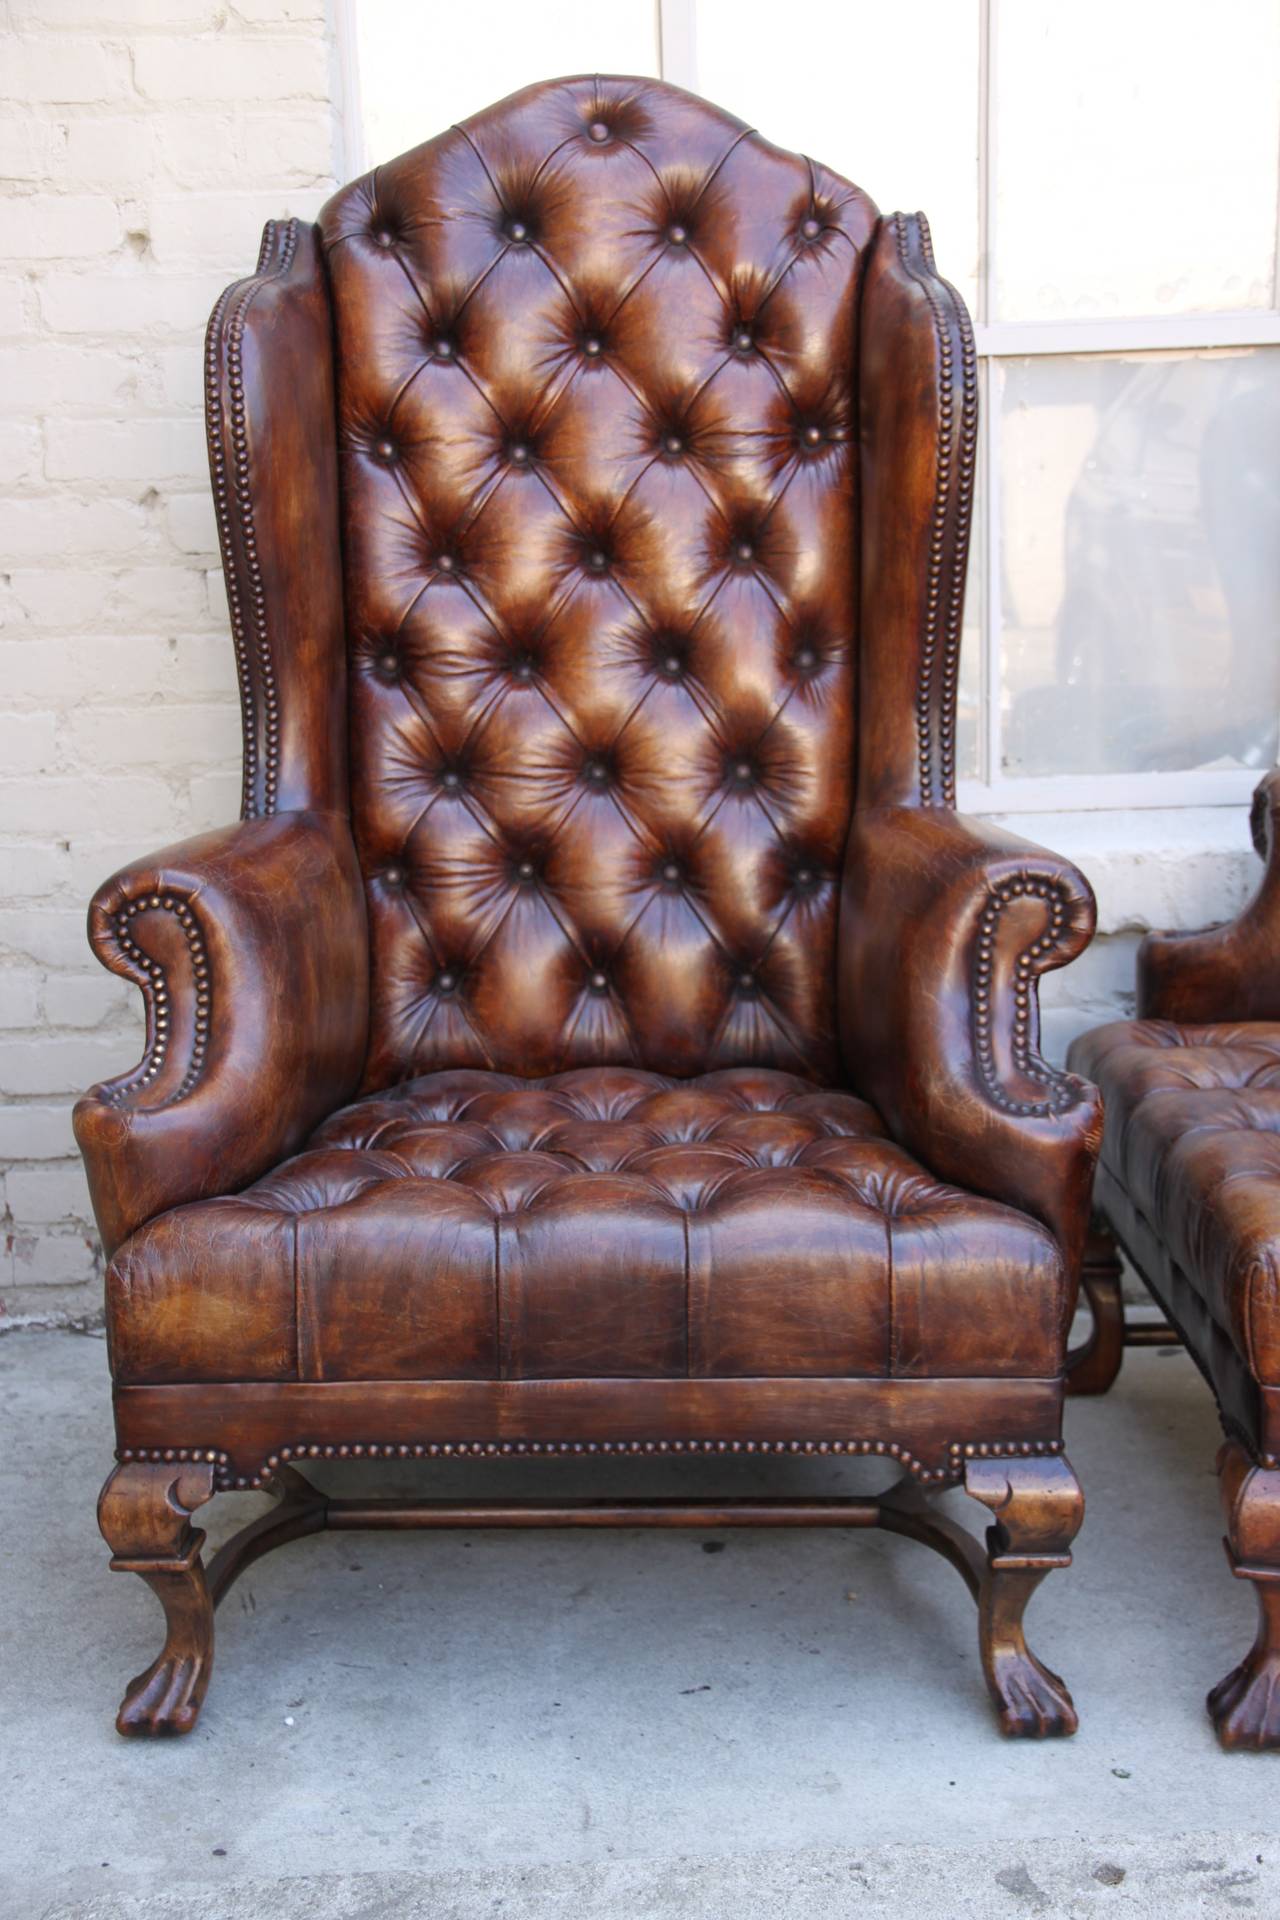 Pair of English Leather Tufted Armchairs In Distressed Condition In Los Angeles, CA